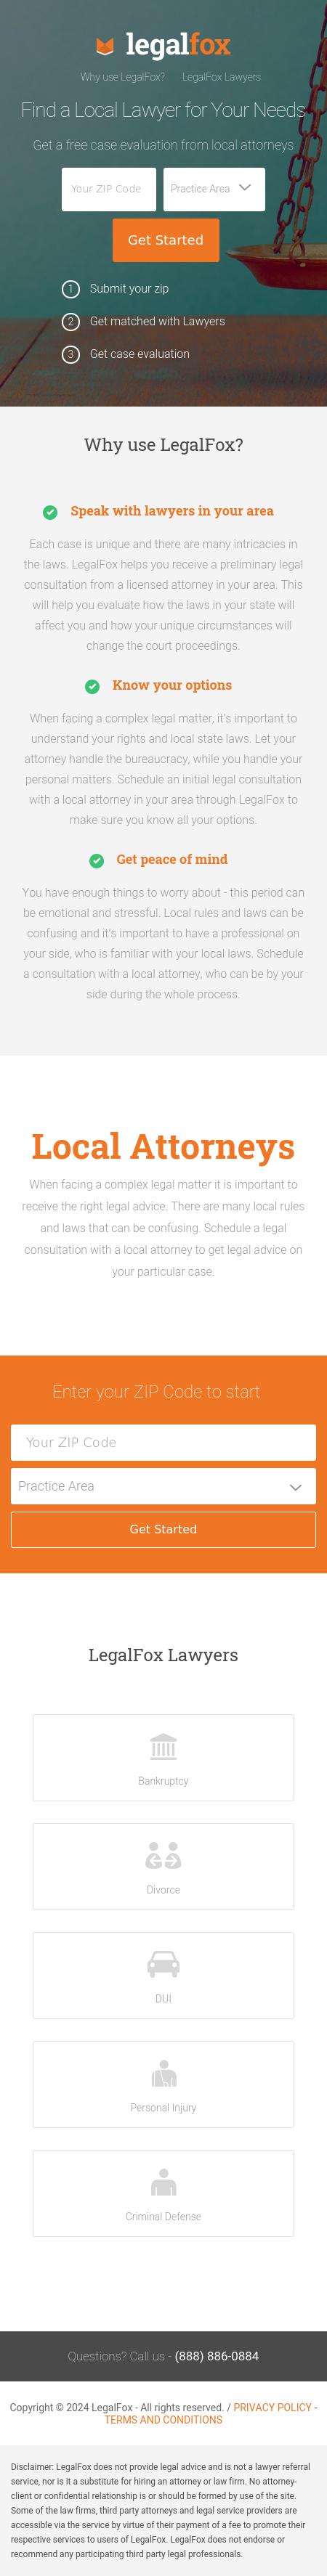 Find a Local Attorney - Lewiston ME Lawyers